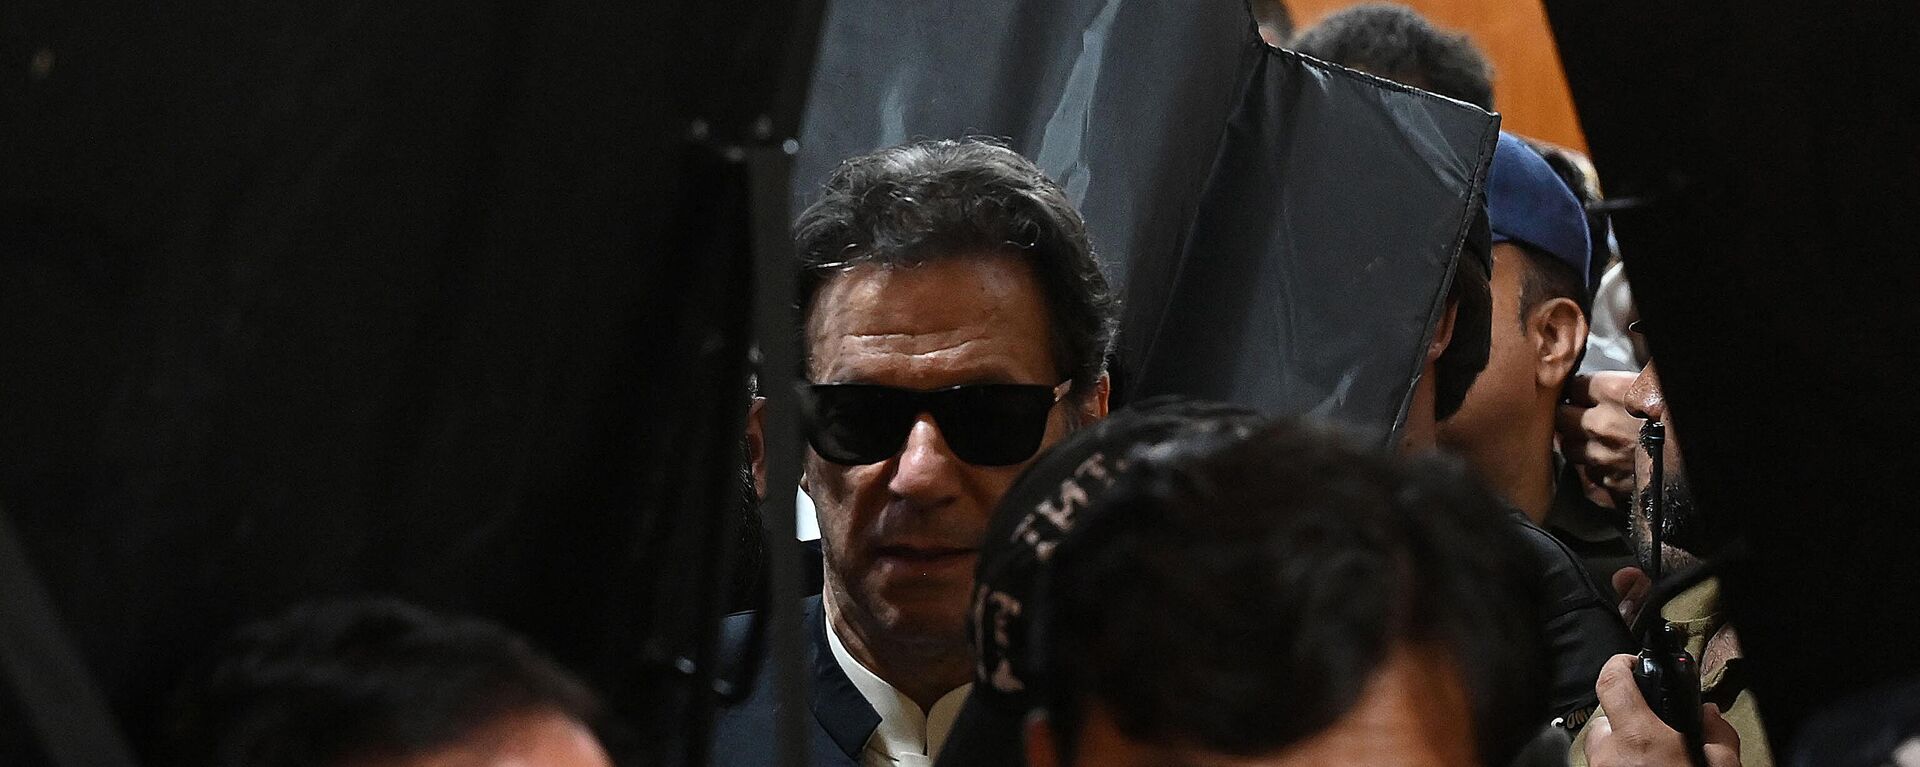 Security personnel with ballistic shields escort former Pakistan's prime minister Imran Khan (C) as he leaves after appearing at the High Court in Lahore on May 19, 2023. - Sputnik India, 1920, 26.05.2023